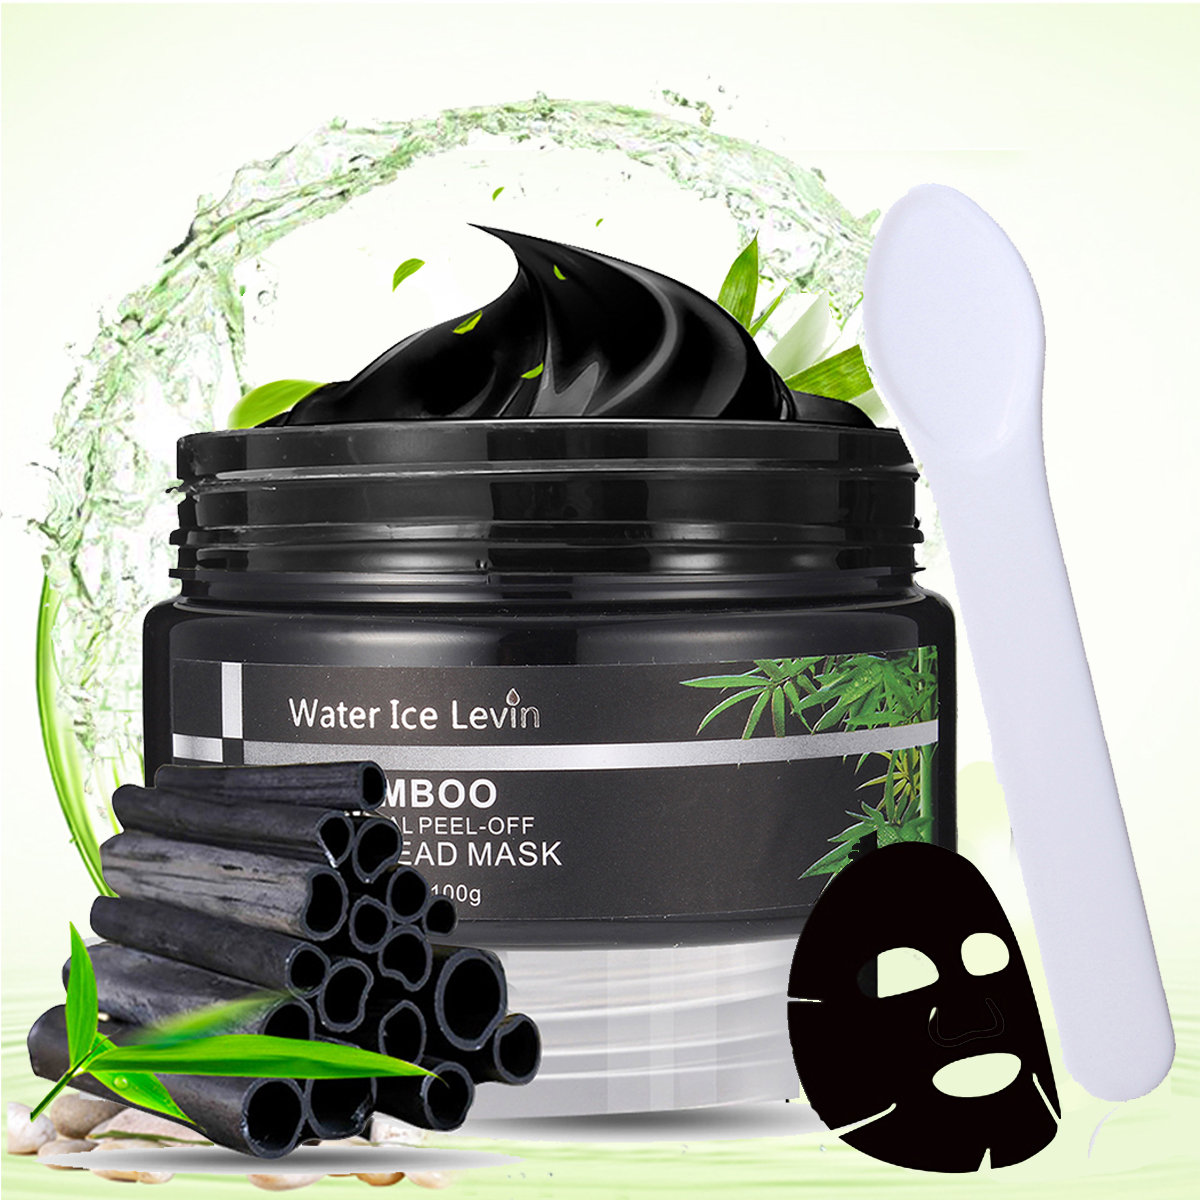 Bamboo Charcoal Blackhead Mask Black Masks Peel-off Cleansing Acne Oil Control Face Care